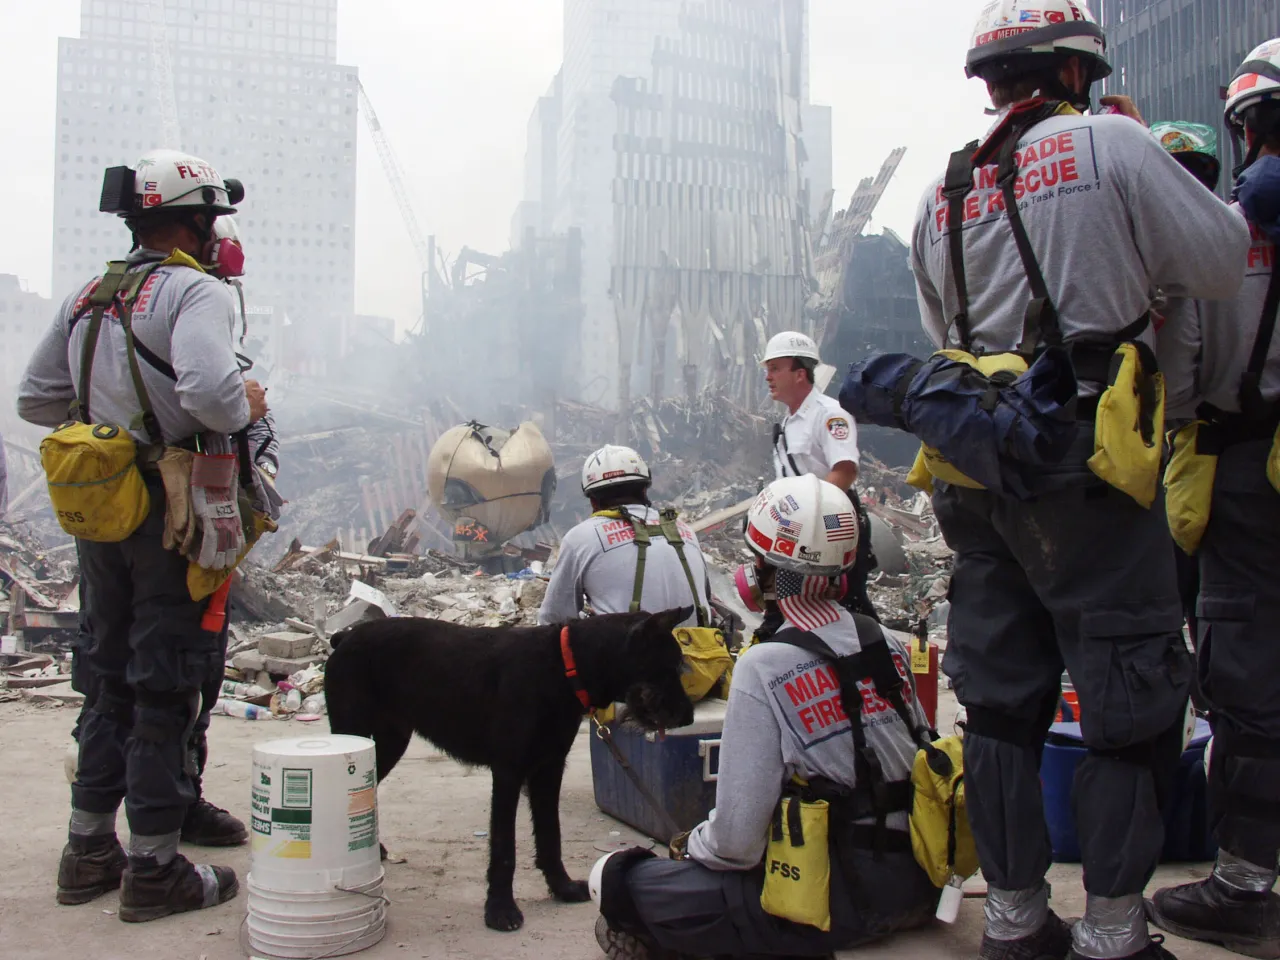 Image: 9/11 - Members of the Florida Urban Search and Rescue Task Force-1 prepare to enter Ground Zero